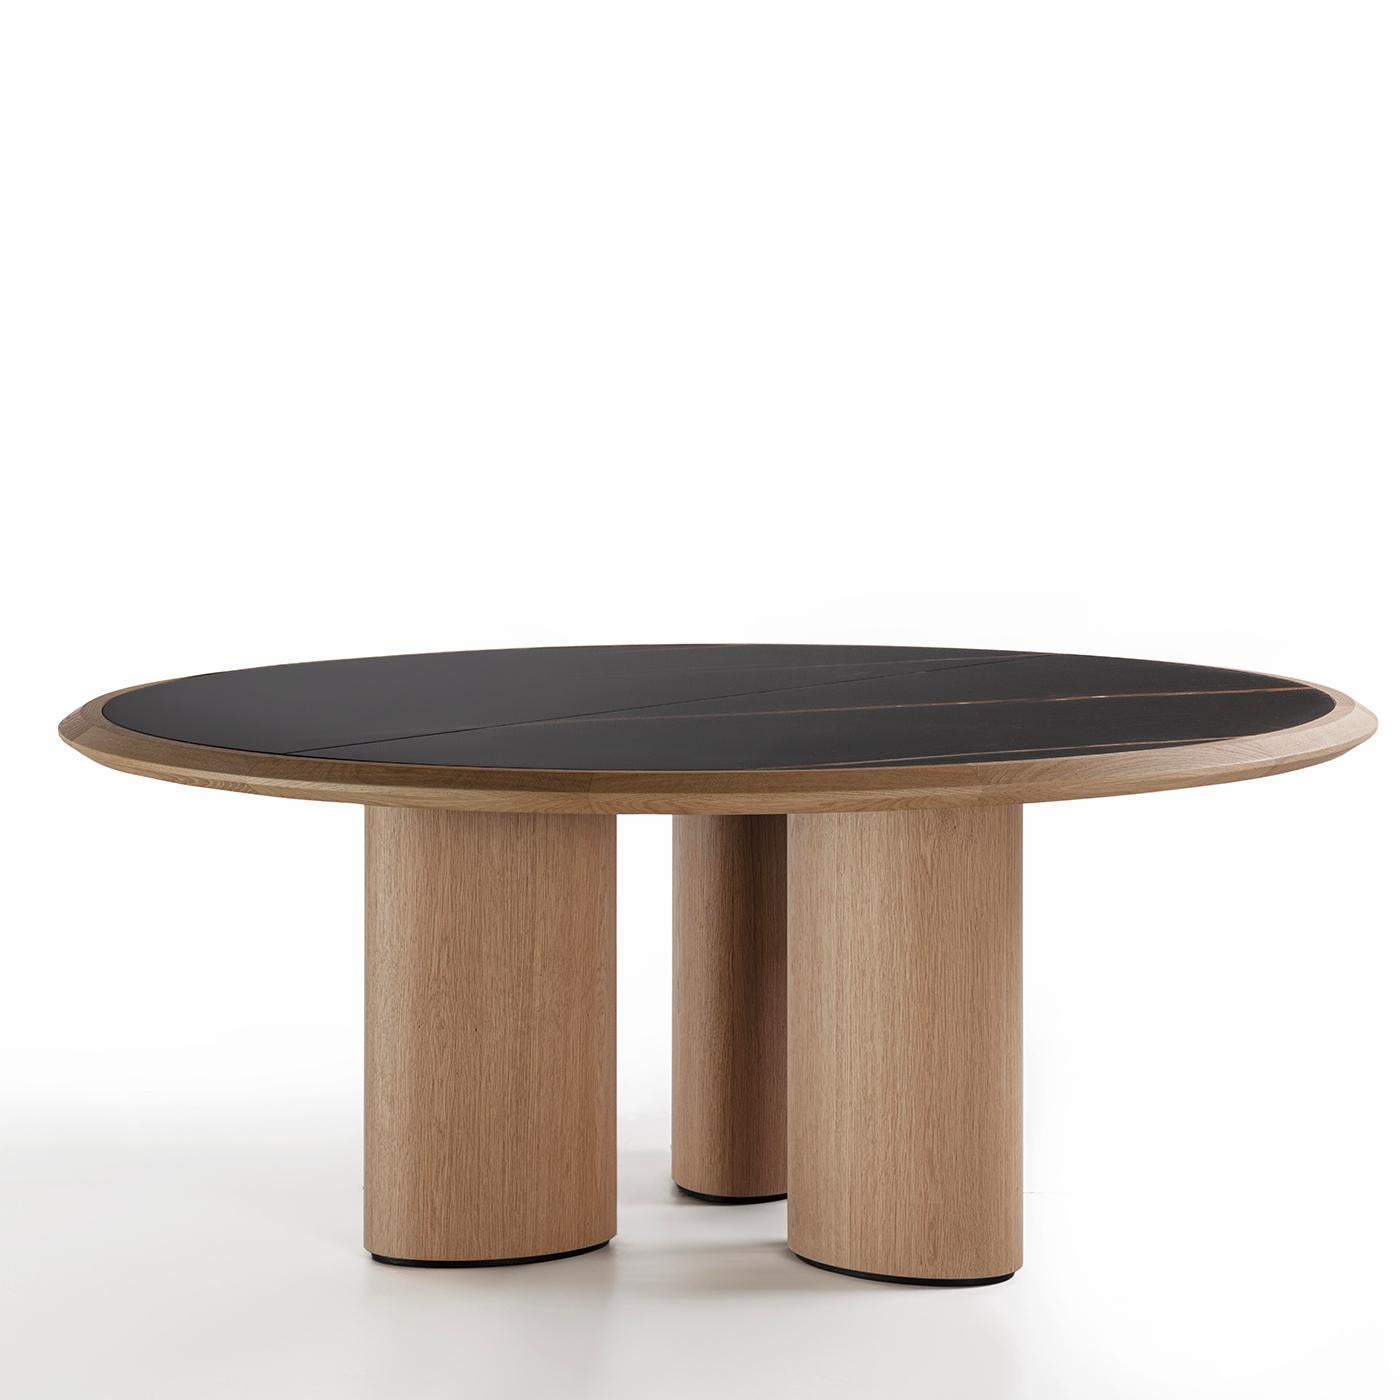 Diamante Round Durmast Sahara Noir Marble Table In New Condition For Sale In Milan, IT